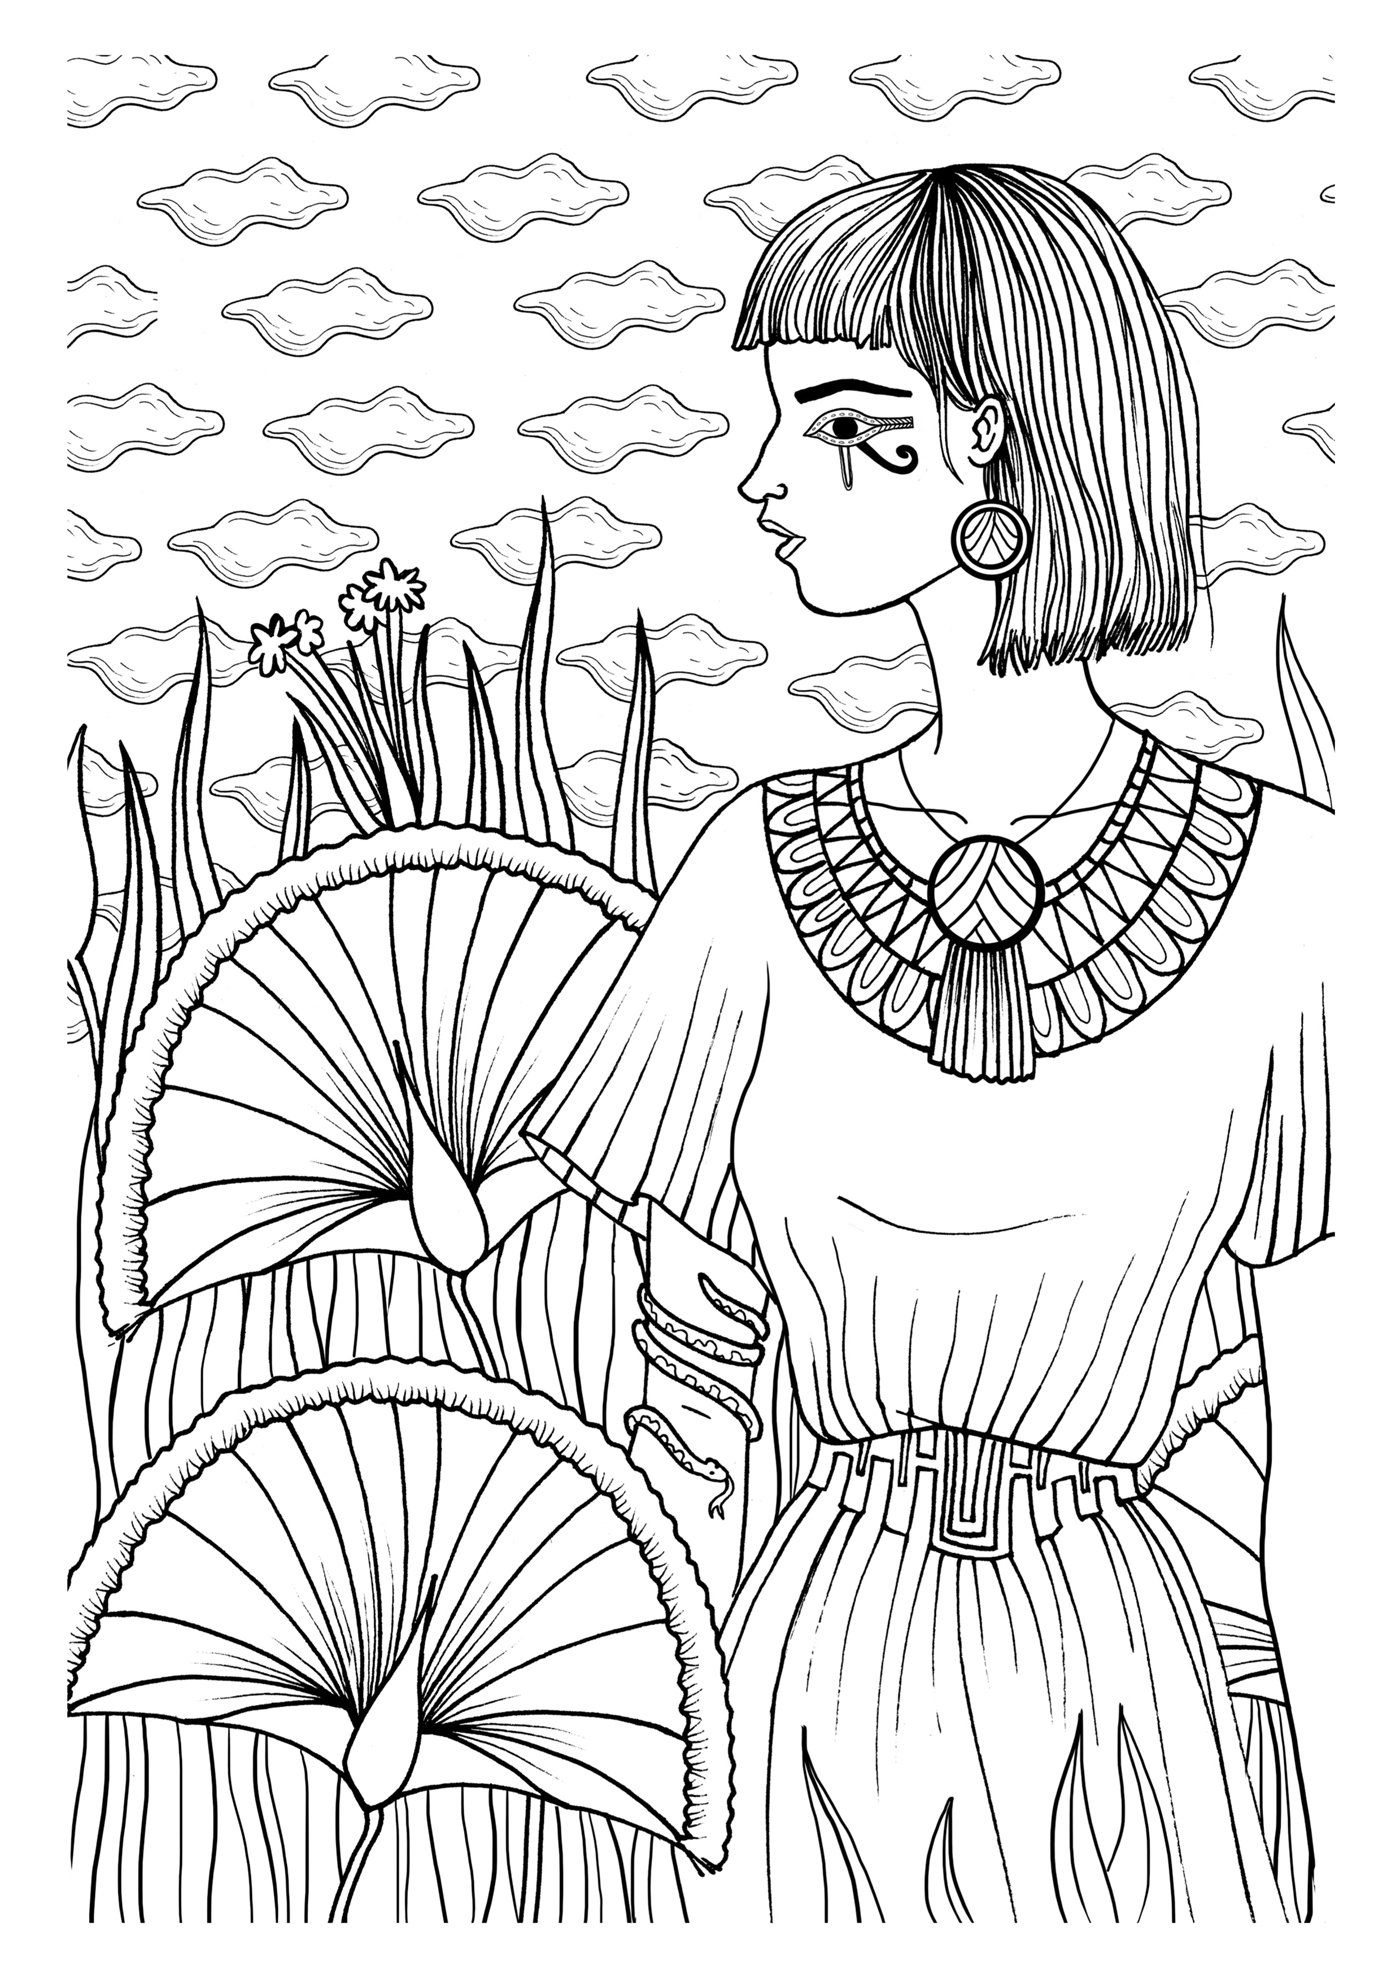 Egypte et Pharaons: 100 Coloriages Anti-Stress by French Auther Mademoiselle Eve focuses on how the Pharaonic  drawings can inspire relaxation and imagination